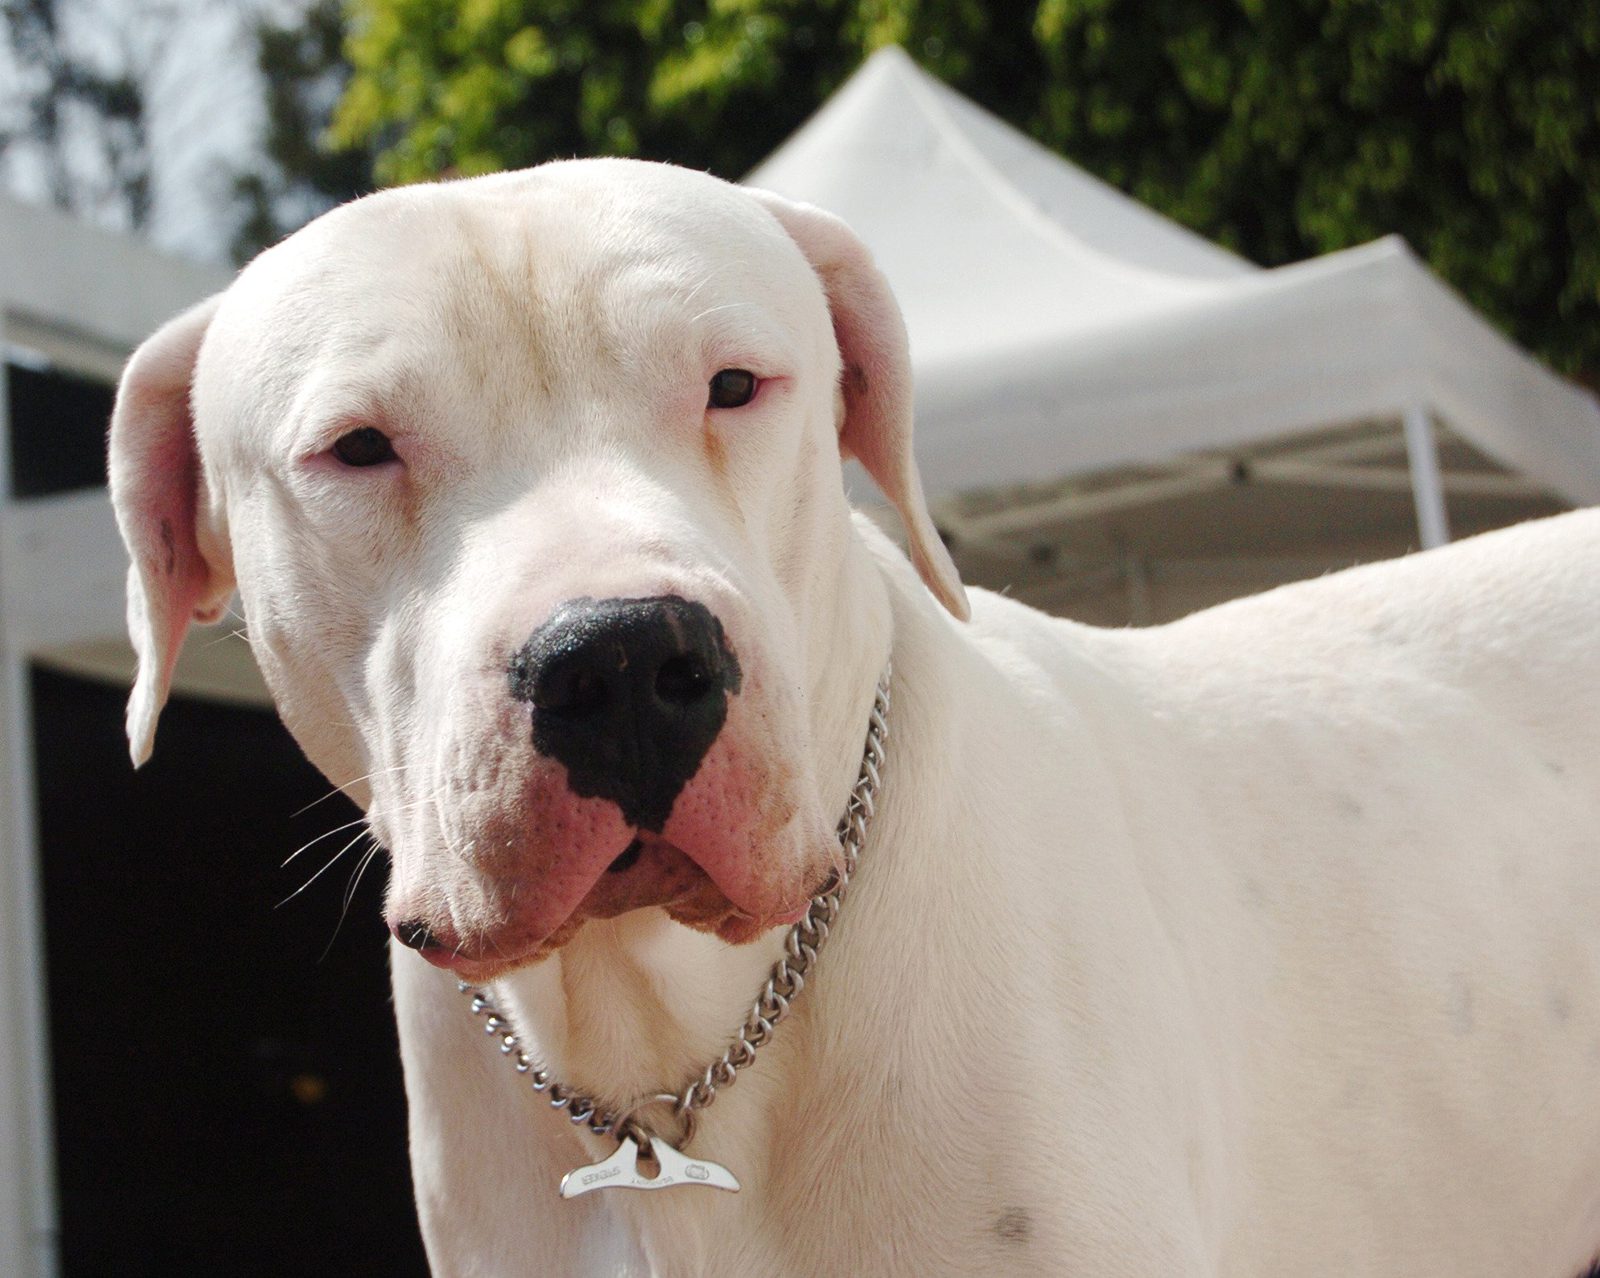 Dogo Argentino - characteristics of the breed, care and maintenance, what to feed, owner reviews, photos of the dog